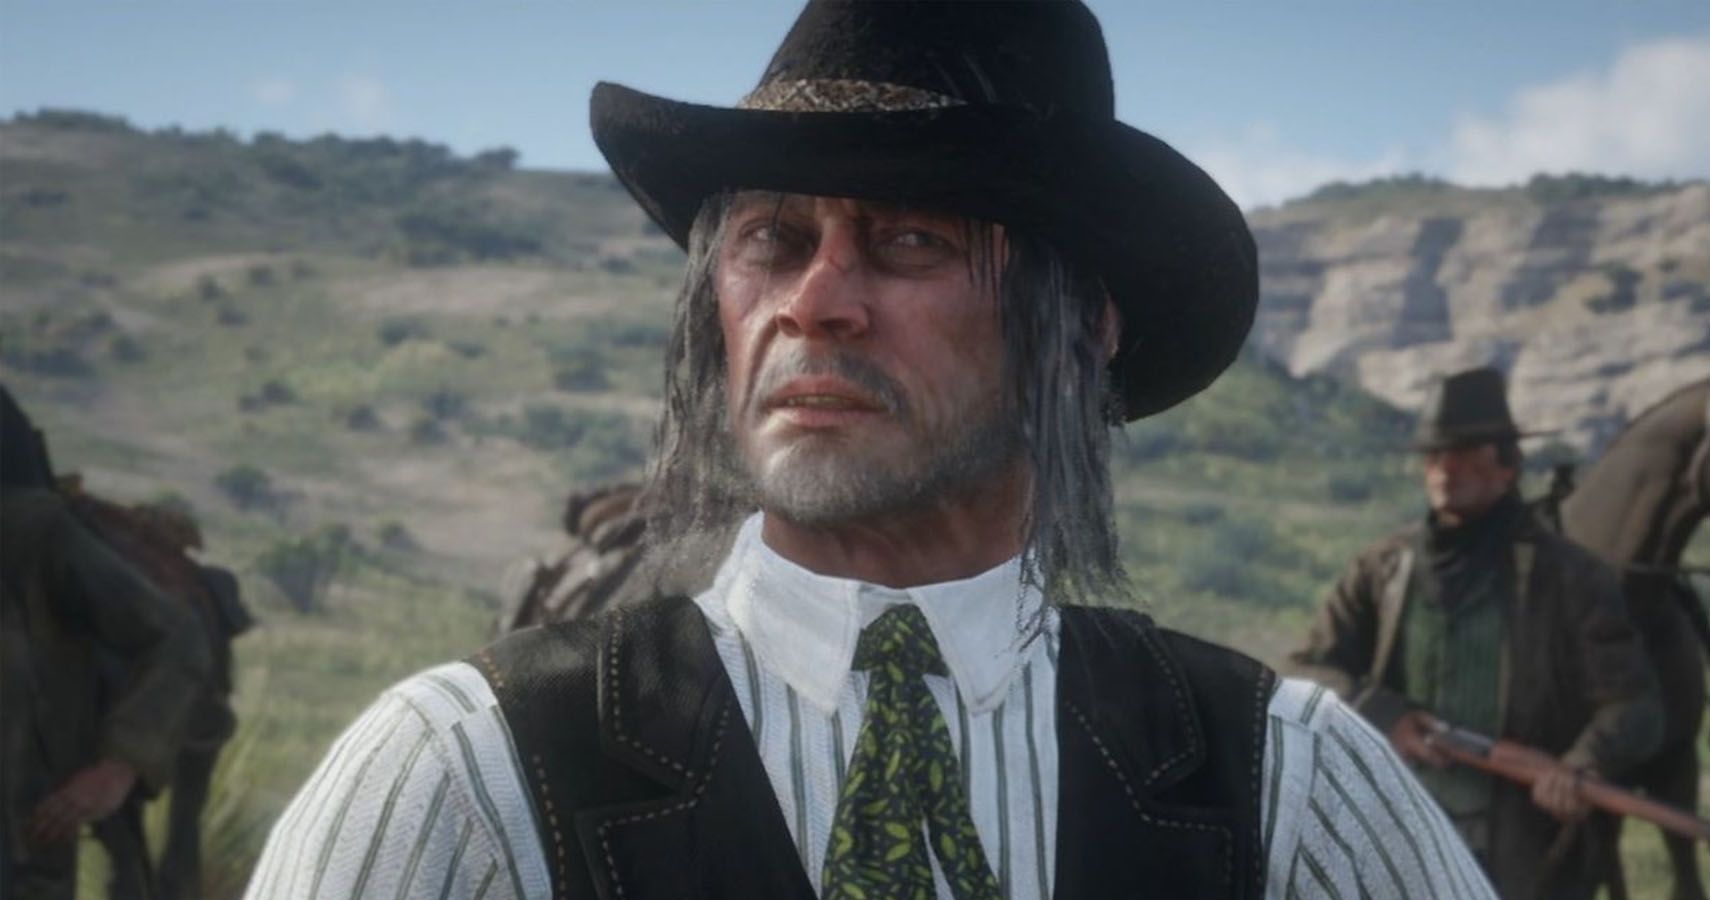 Red Dead Redemption 2 Players Have Been Harassing A Real Person Named Colm ODriscoll